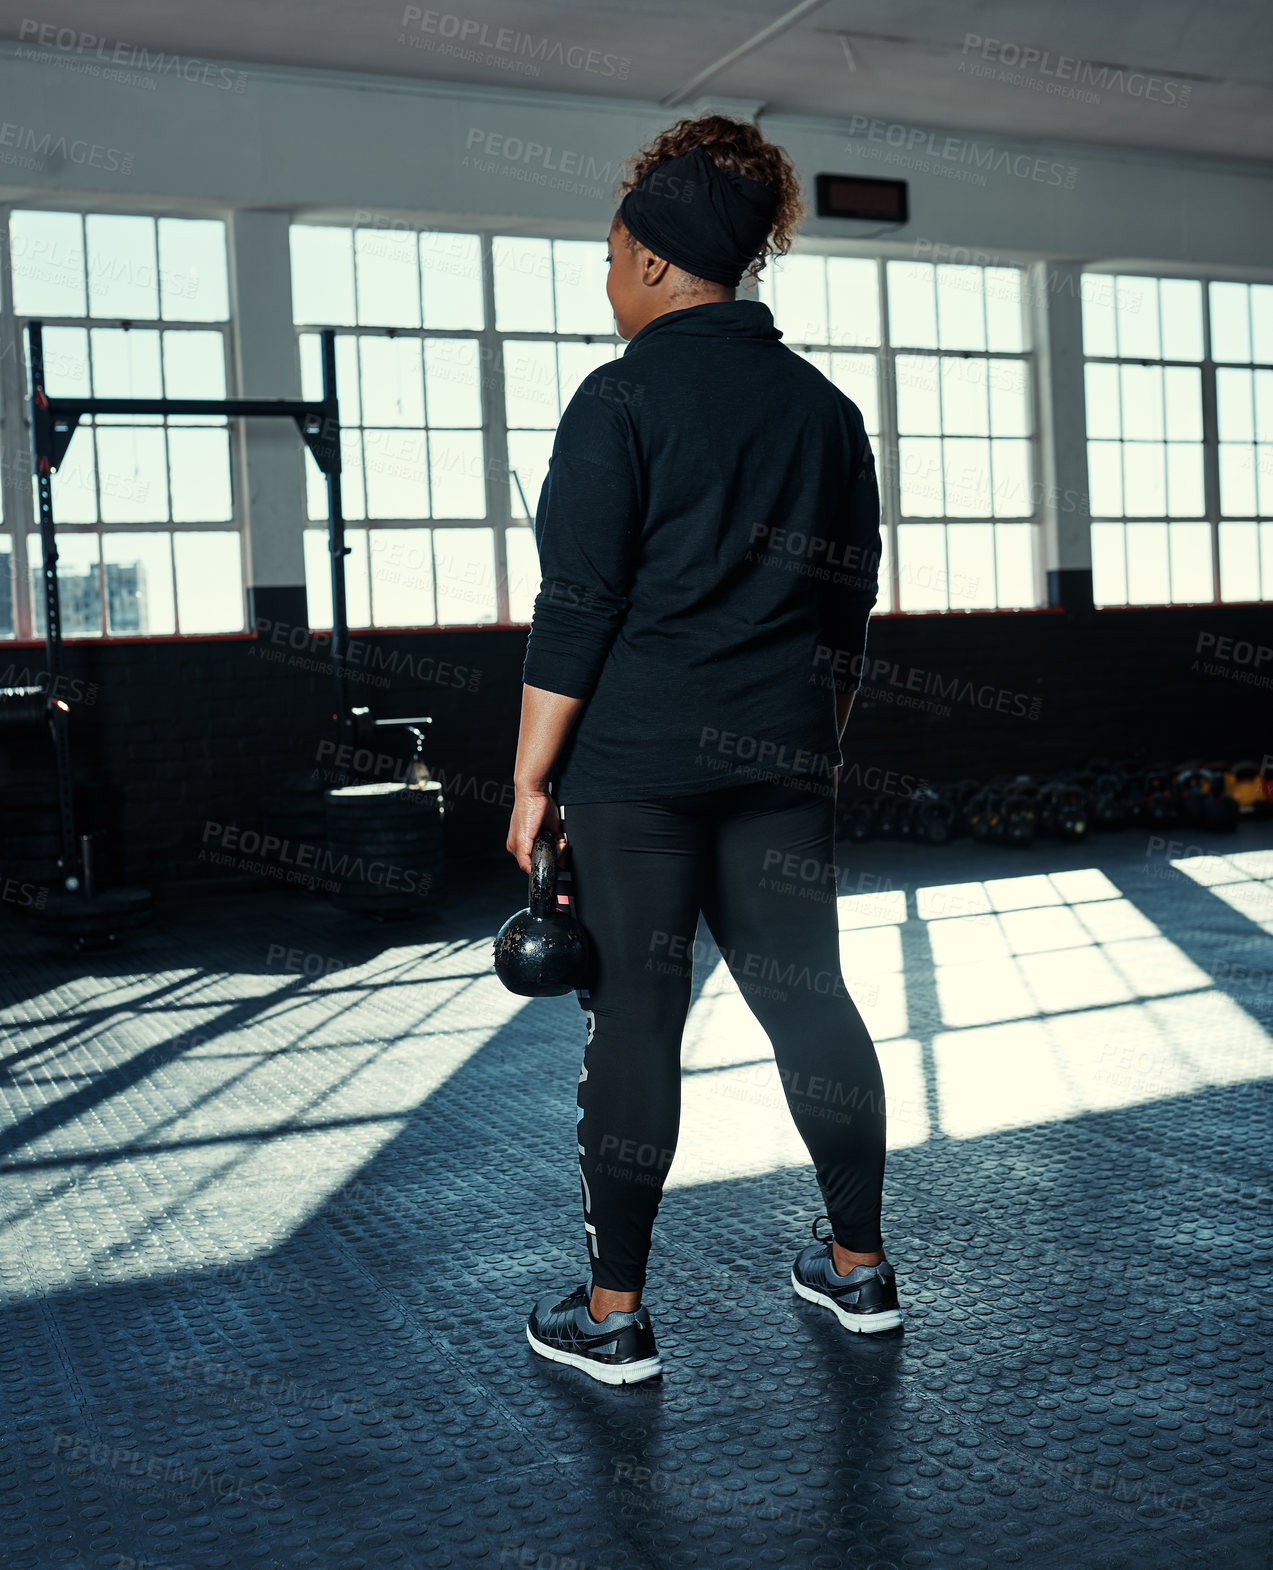 Buy stock photo Rearview shot of an unrecognizable woman lifting kettlebells in a gym